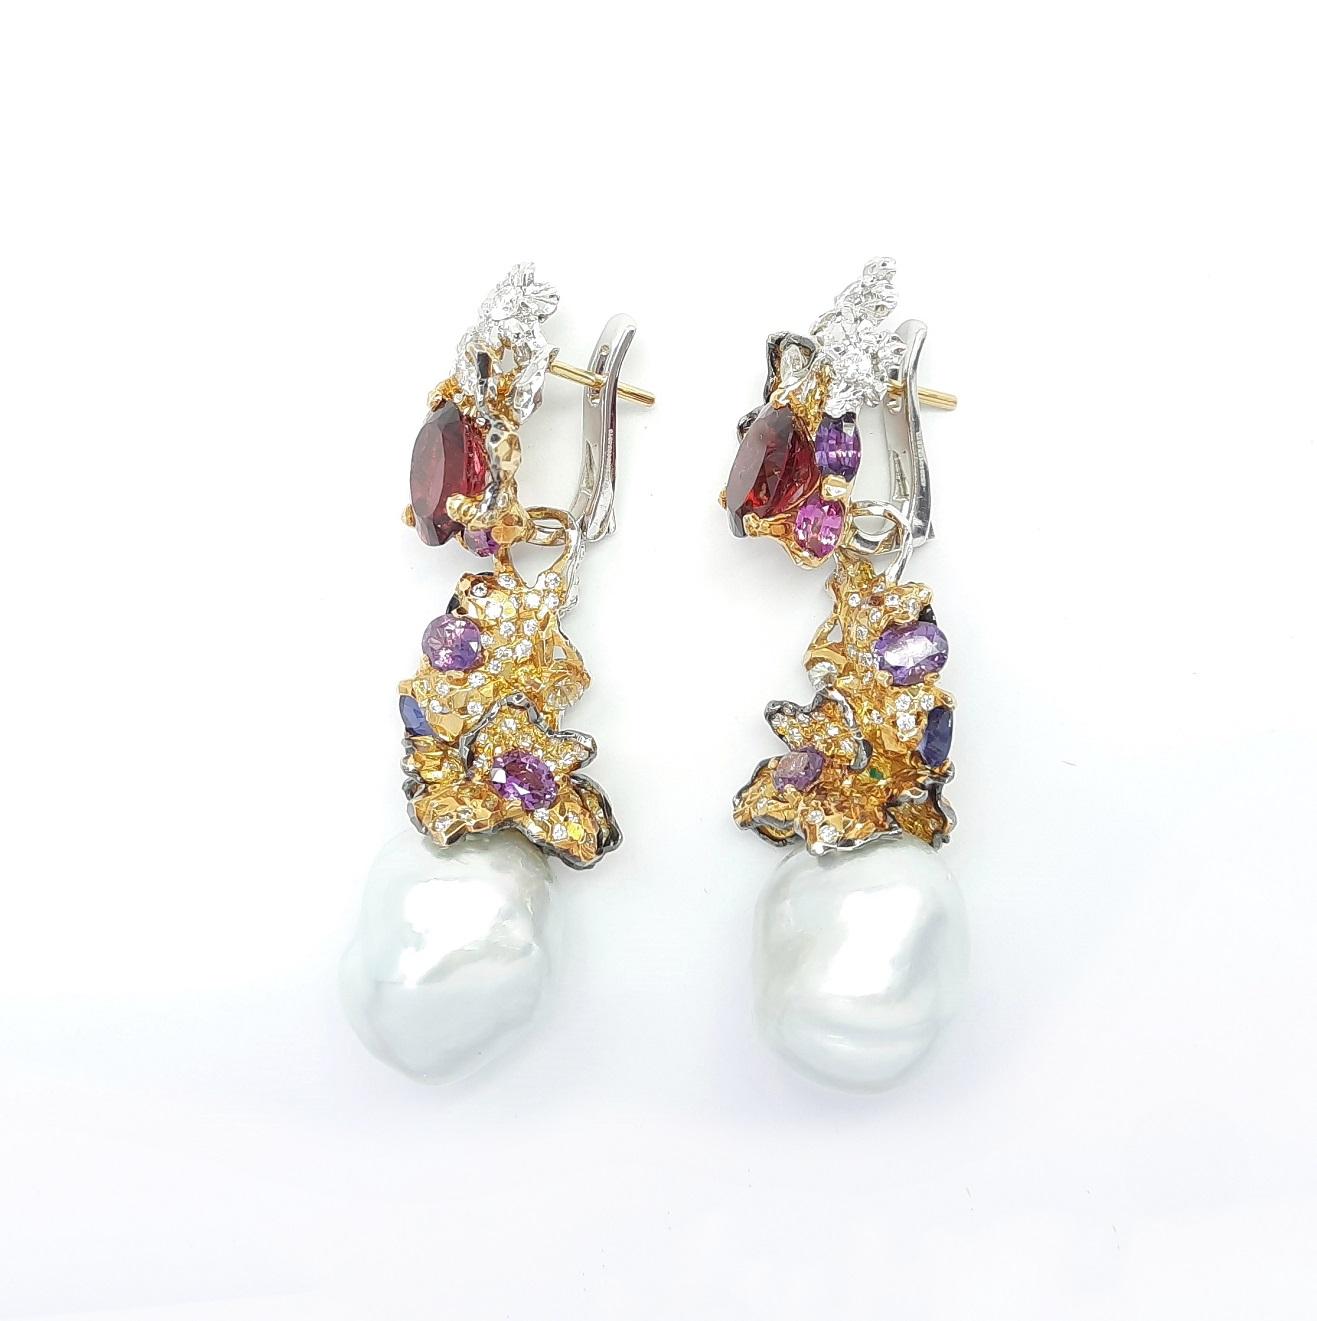 Inspired by Impressionism, MOISEIKIN® has created a blooming flower earrings  in tridimensional manner. Trembling flowers and sweet fragrance of coming ripe fruits are embodied  in gems and metals. Inside diamond flowers are vivid rubellite